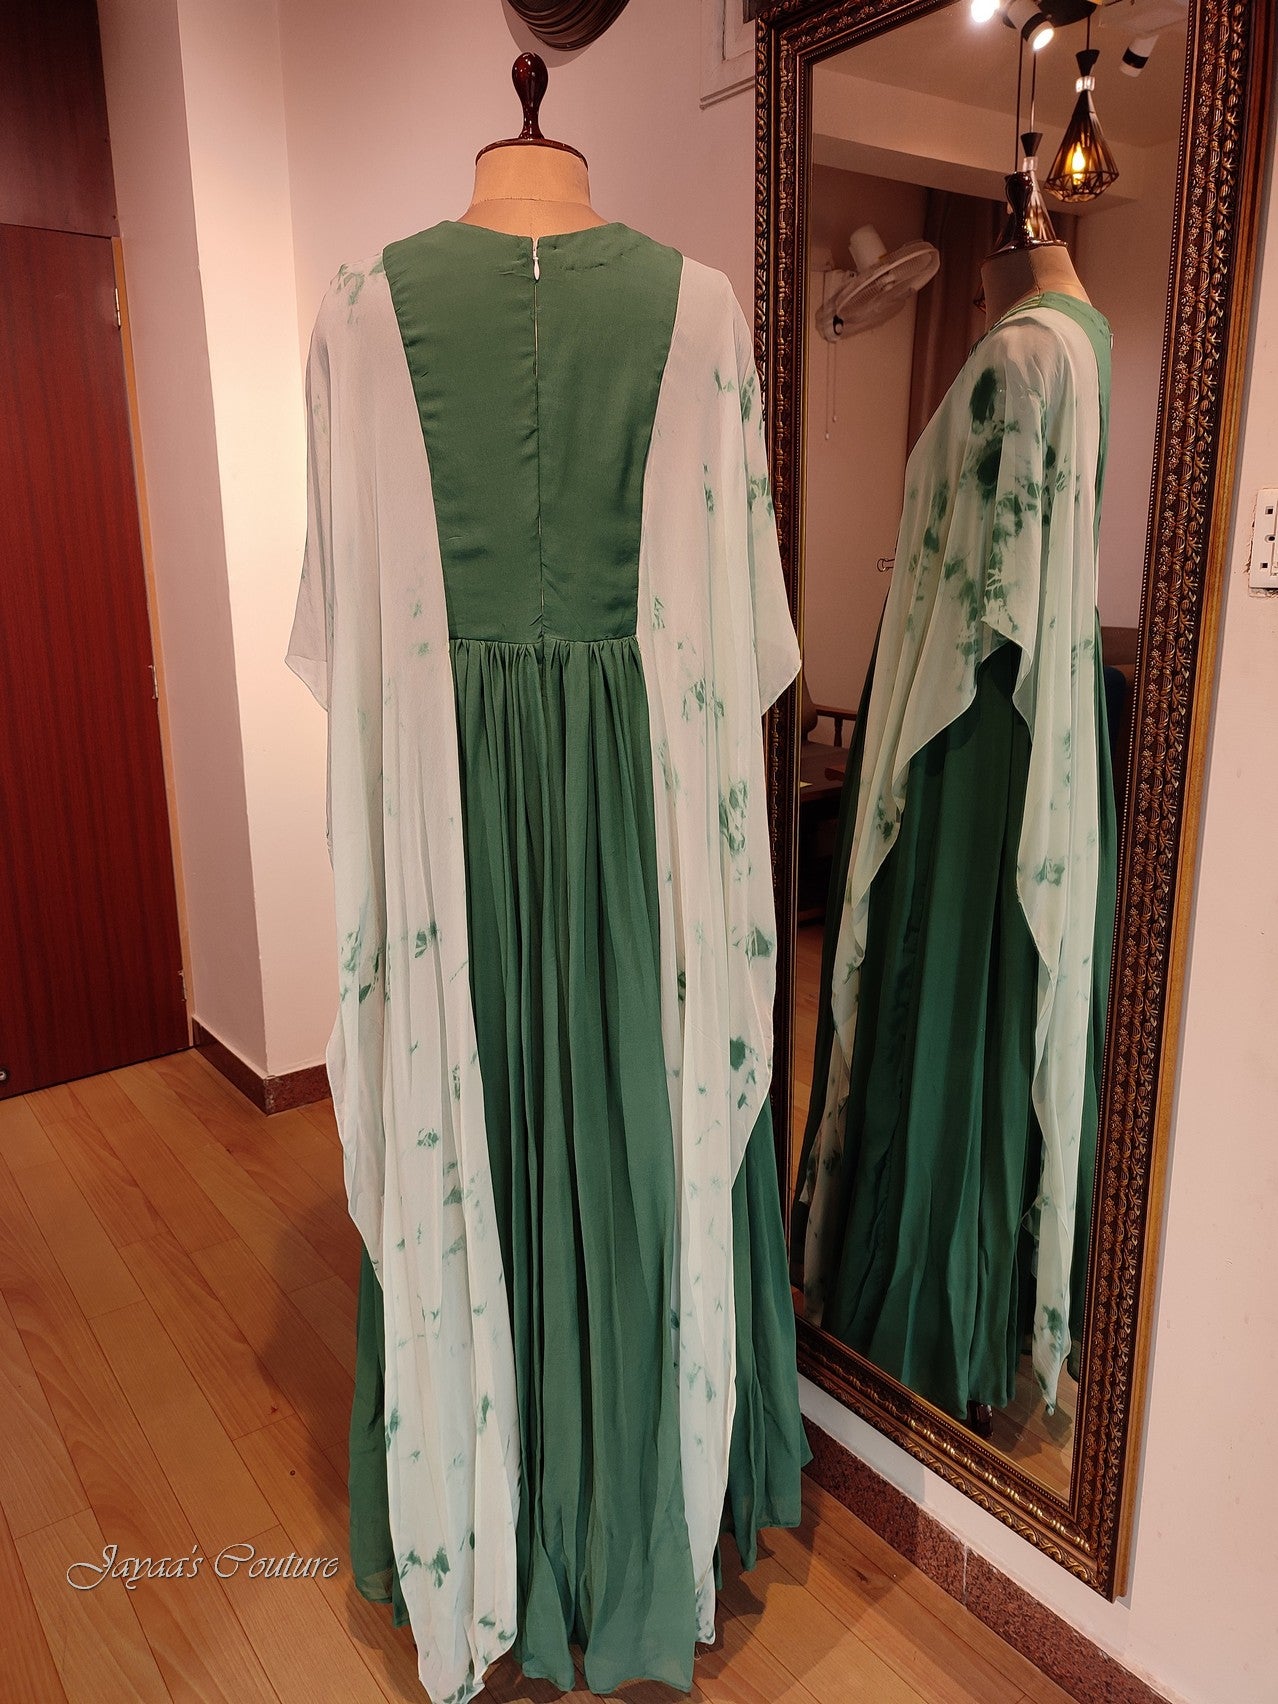 Green gown with toe and dye drape sleeves